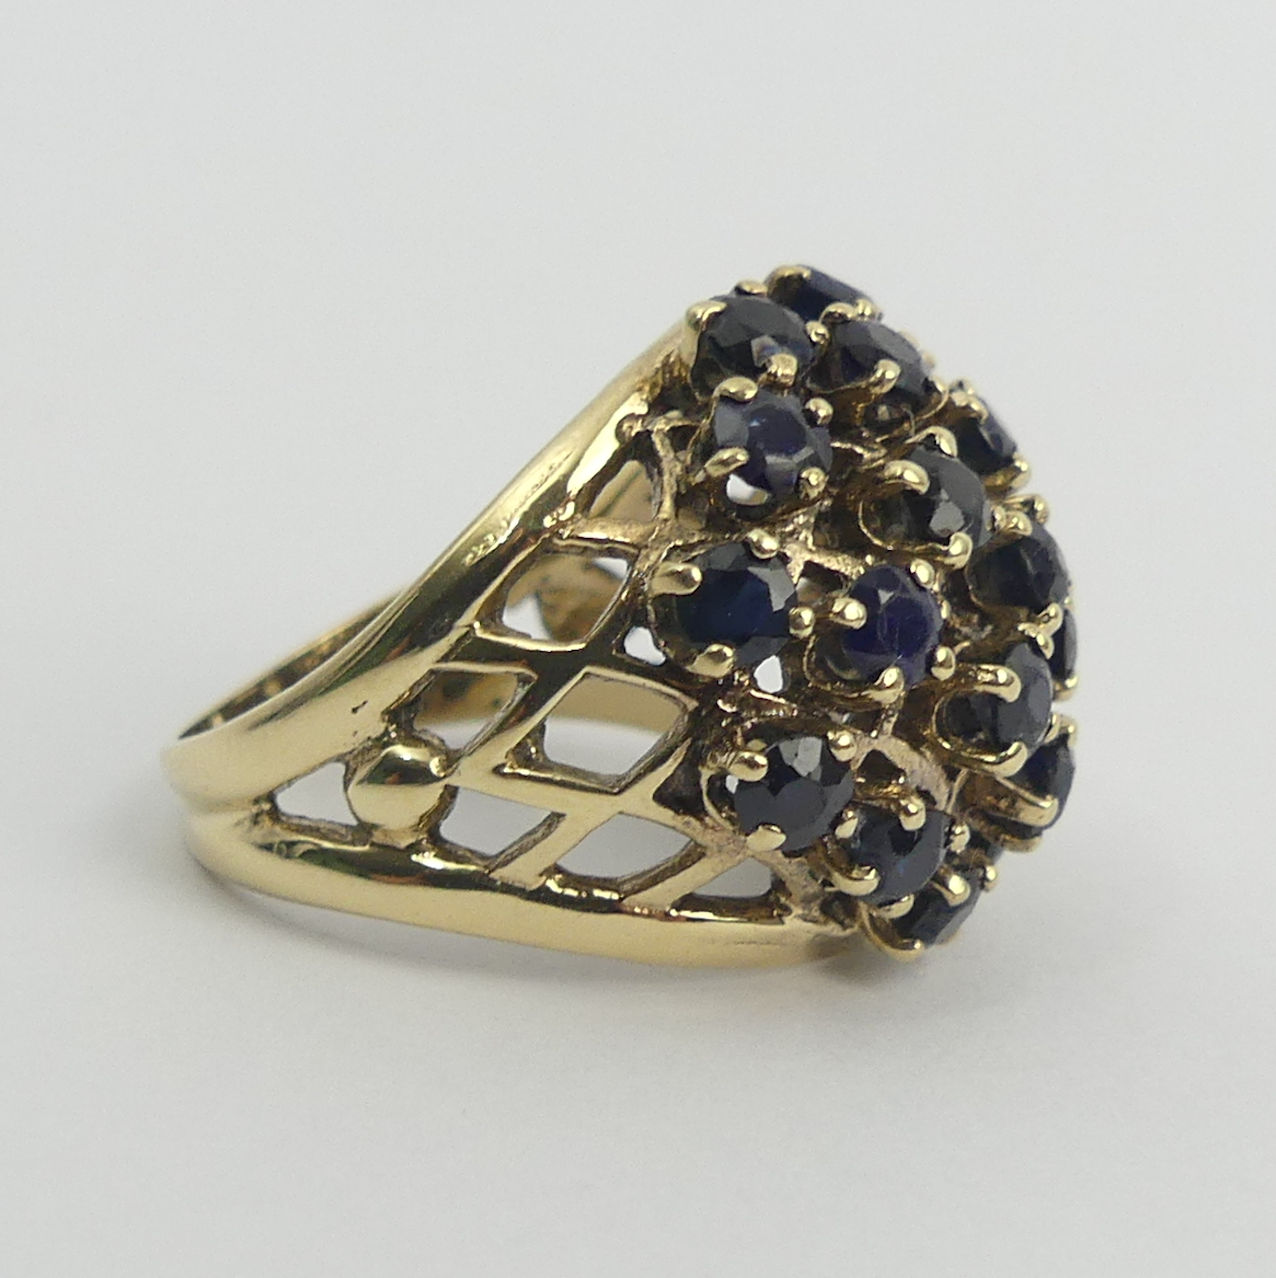 9ct gold sapphire bombe design ring, 7.5 grams, Birm.1963. Size M, 18.5 mm. UK Postage £12. - Image 3 of 5